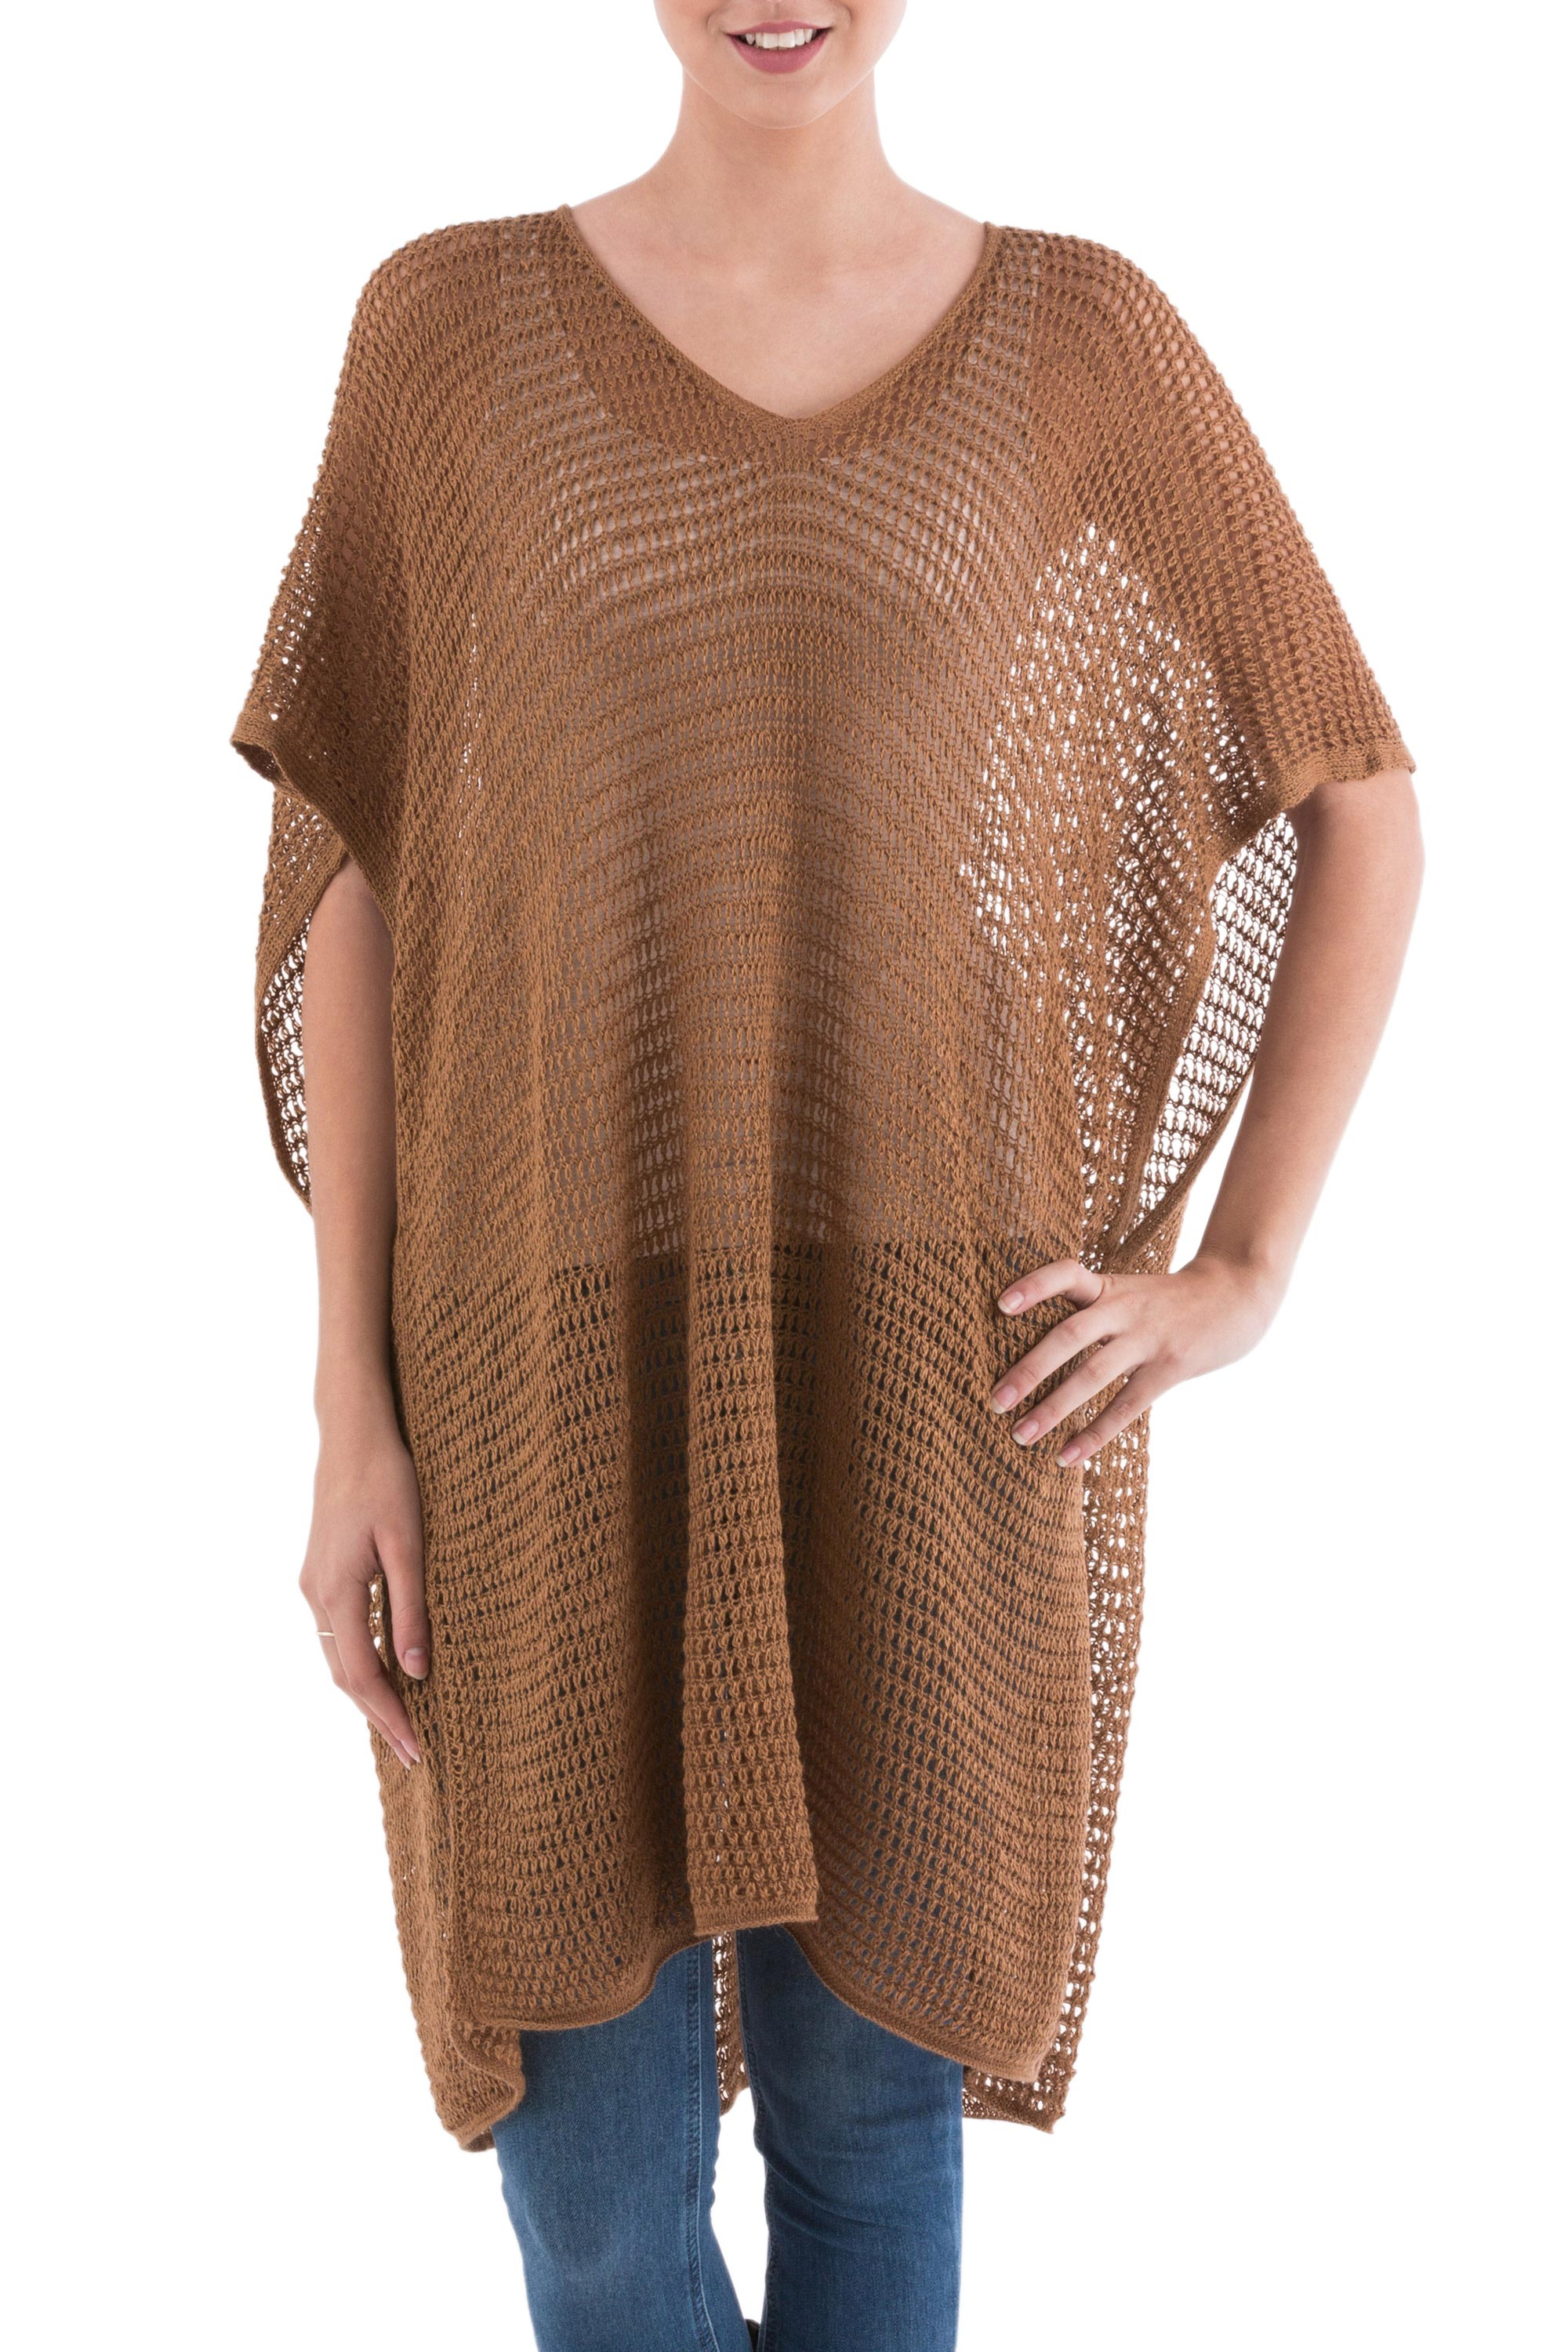 Knit Copper Tunic with V Neck and Short Sleeves - Copper Dreamcatcher ...